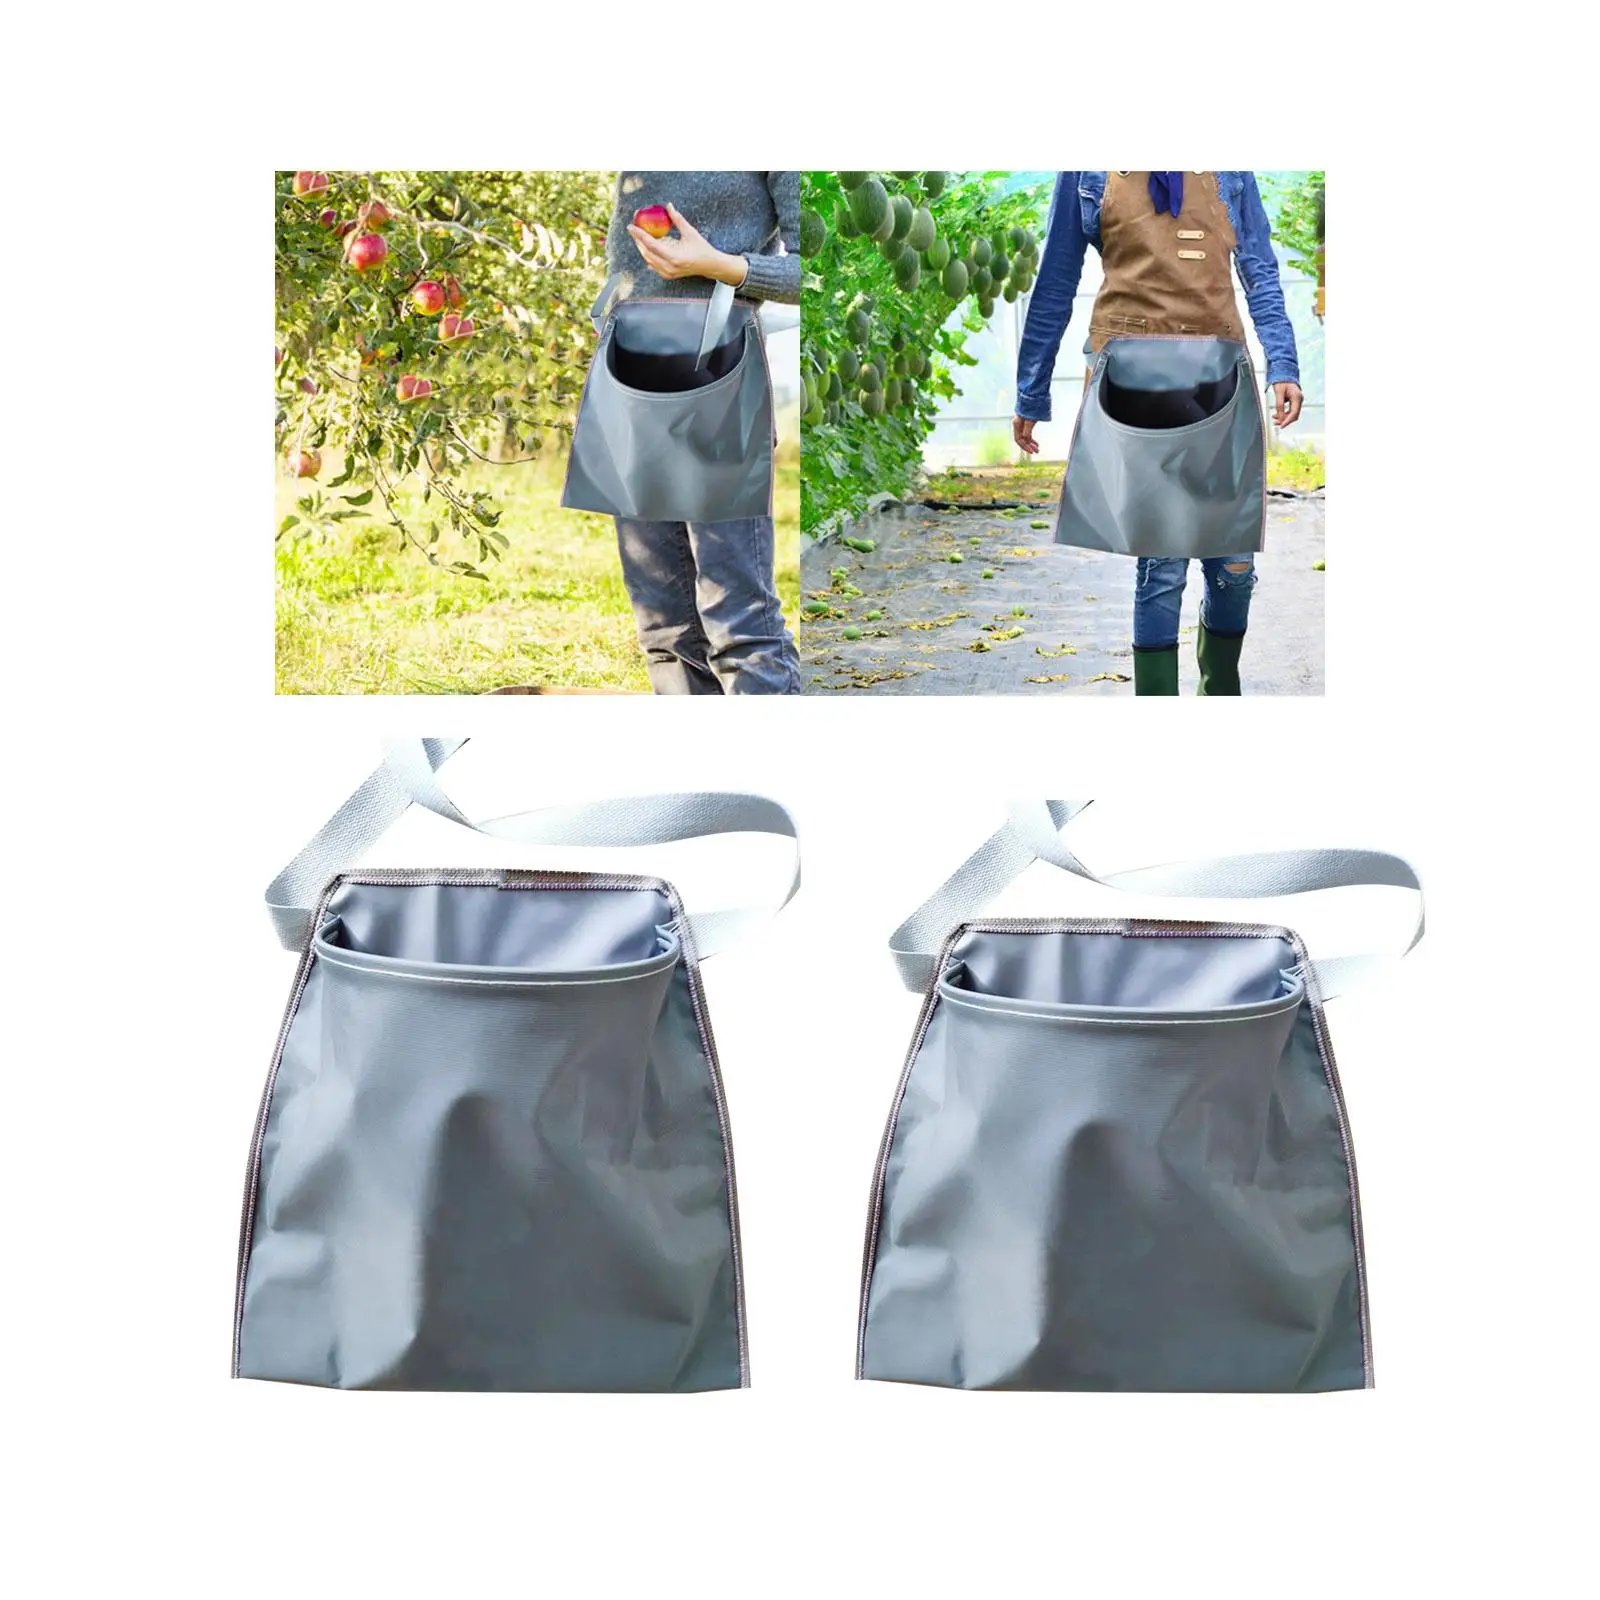 Fruit Storage Apron Pouch Heavy Duty Agricultural Picking Bag Harvest Apron for Orchard Hunting Outdoor Vegetable Farm